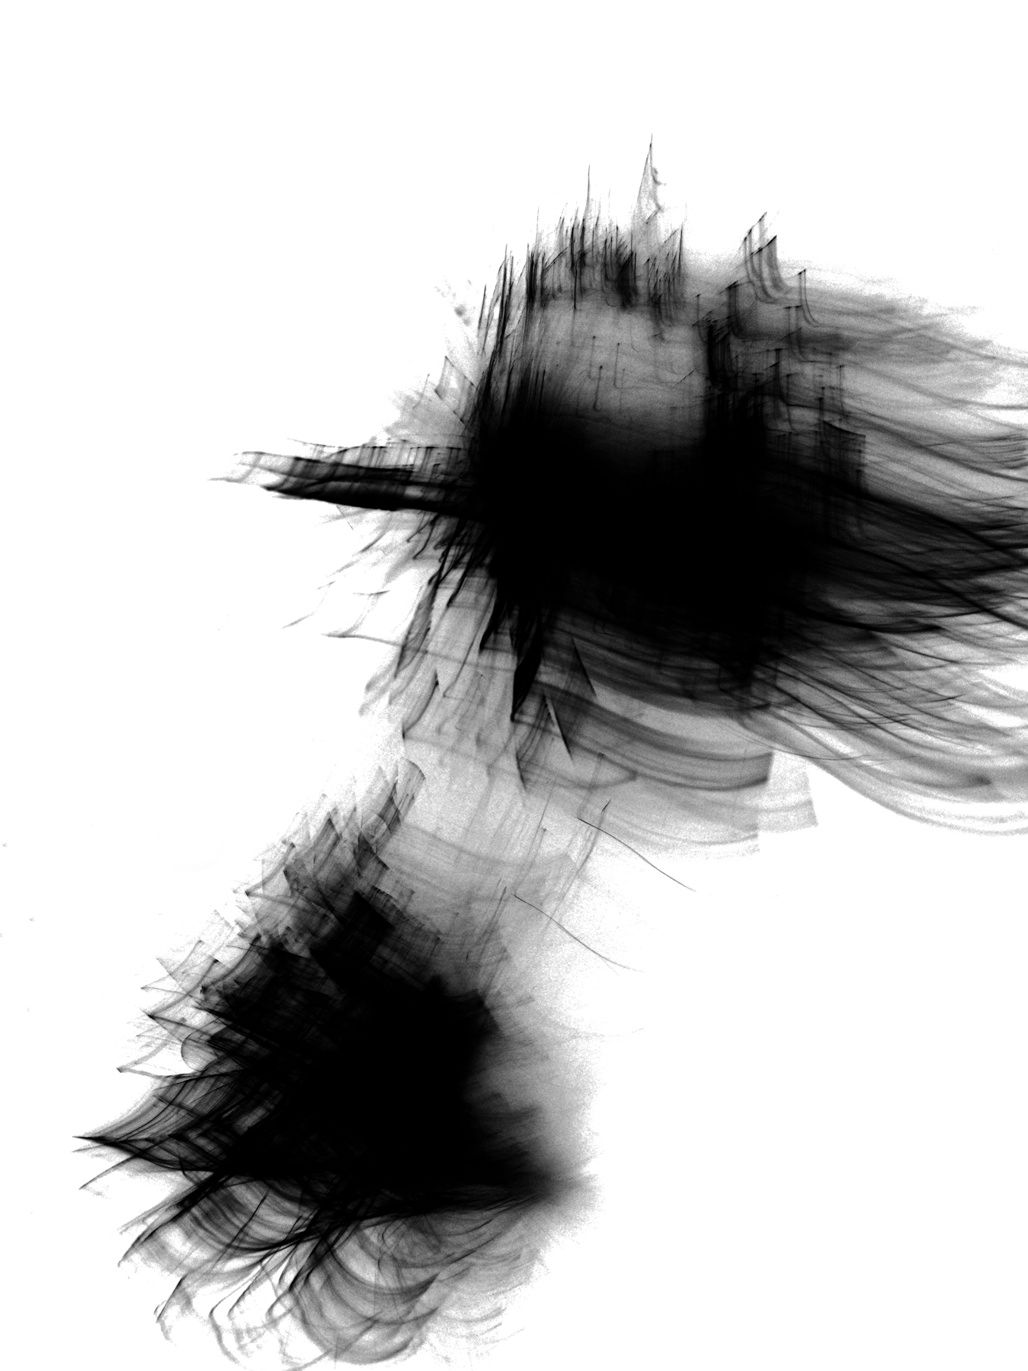 Untitled, Feathers, 2011, Black and White Abstract Photography, Shirine Gill